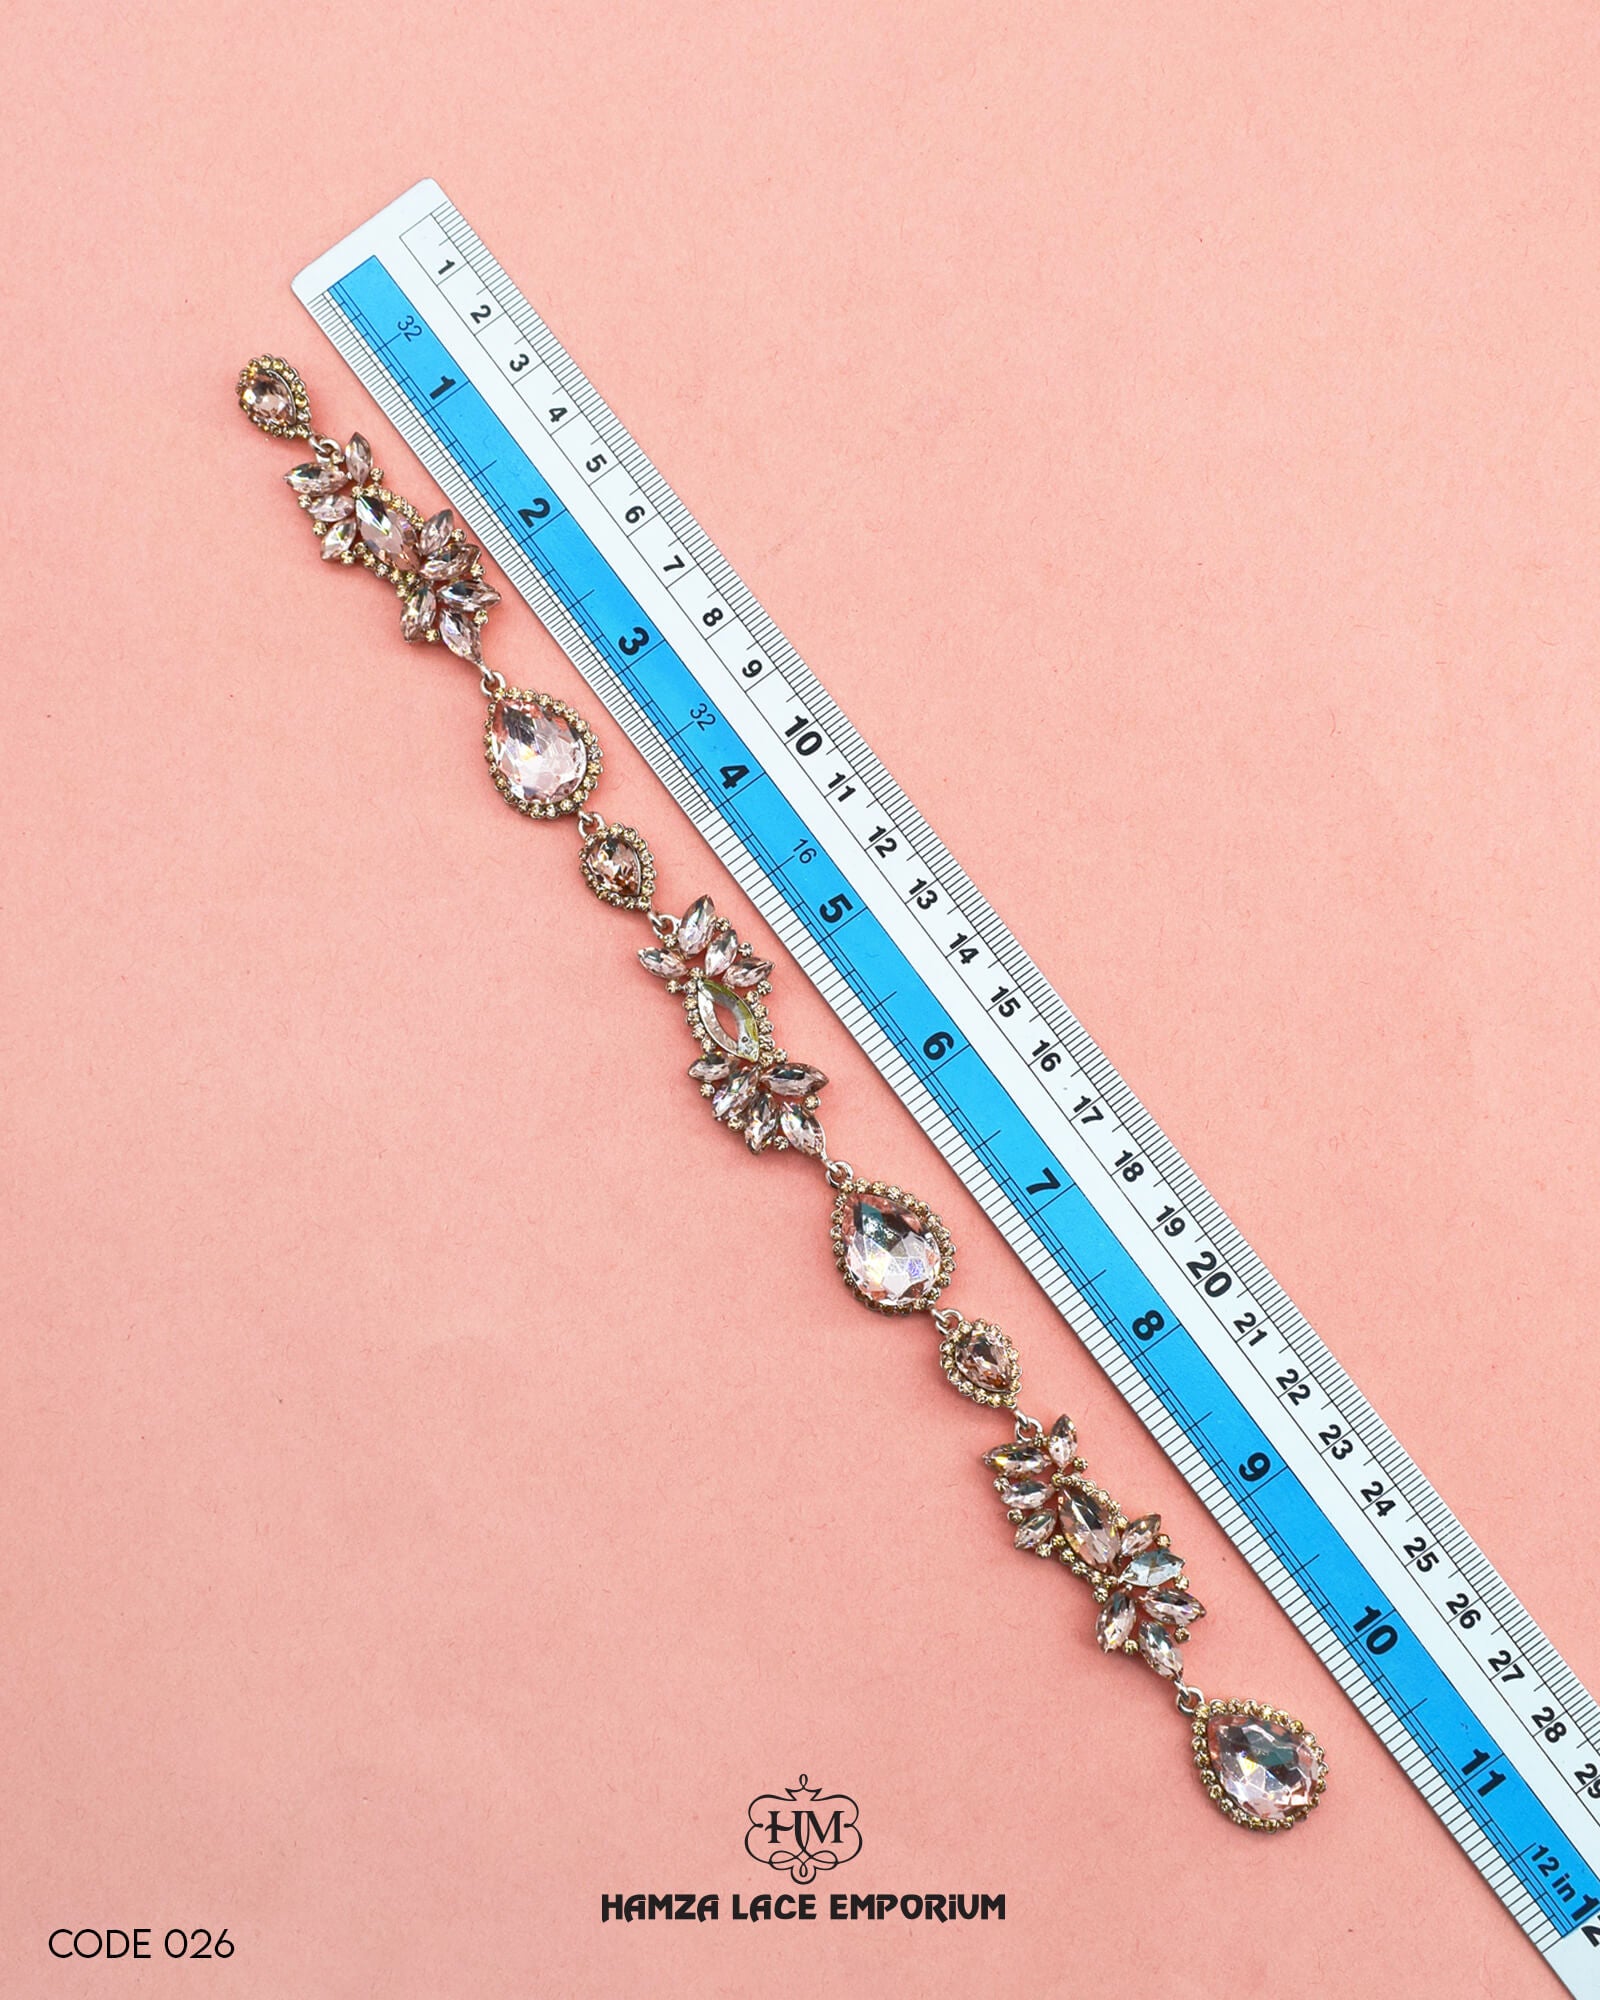 The 'Button Patti 026' size is showcased using a ruler for precise measurement.